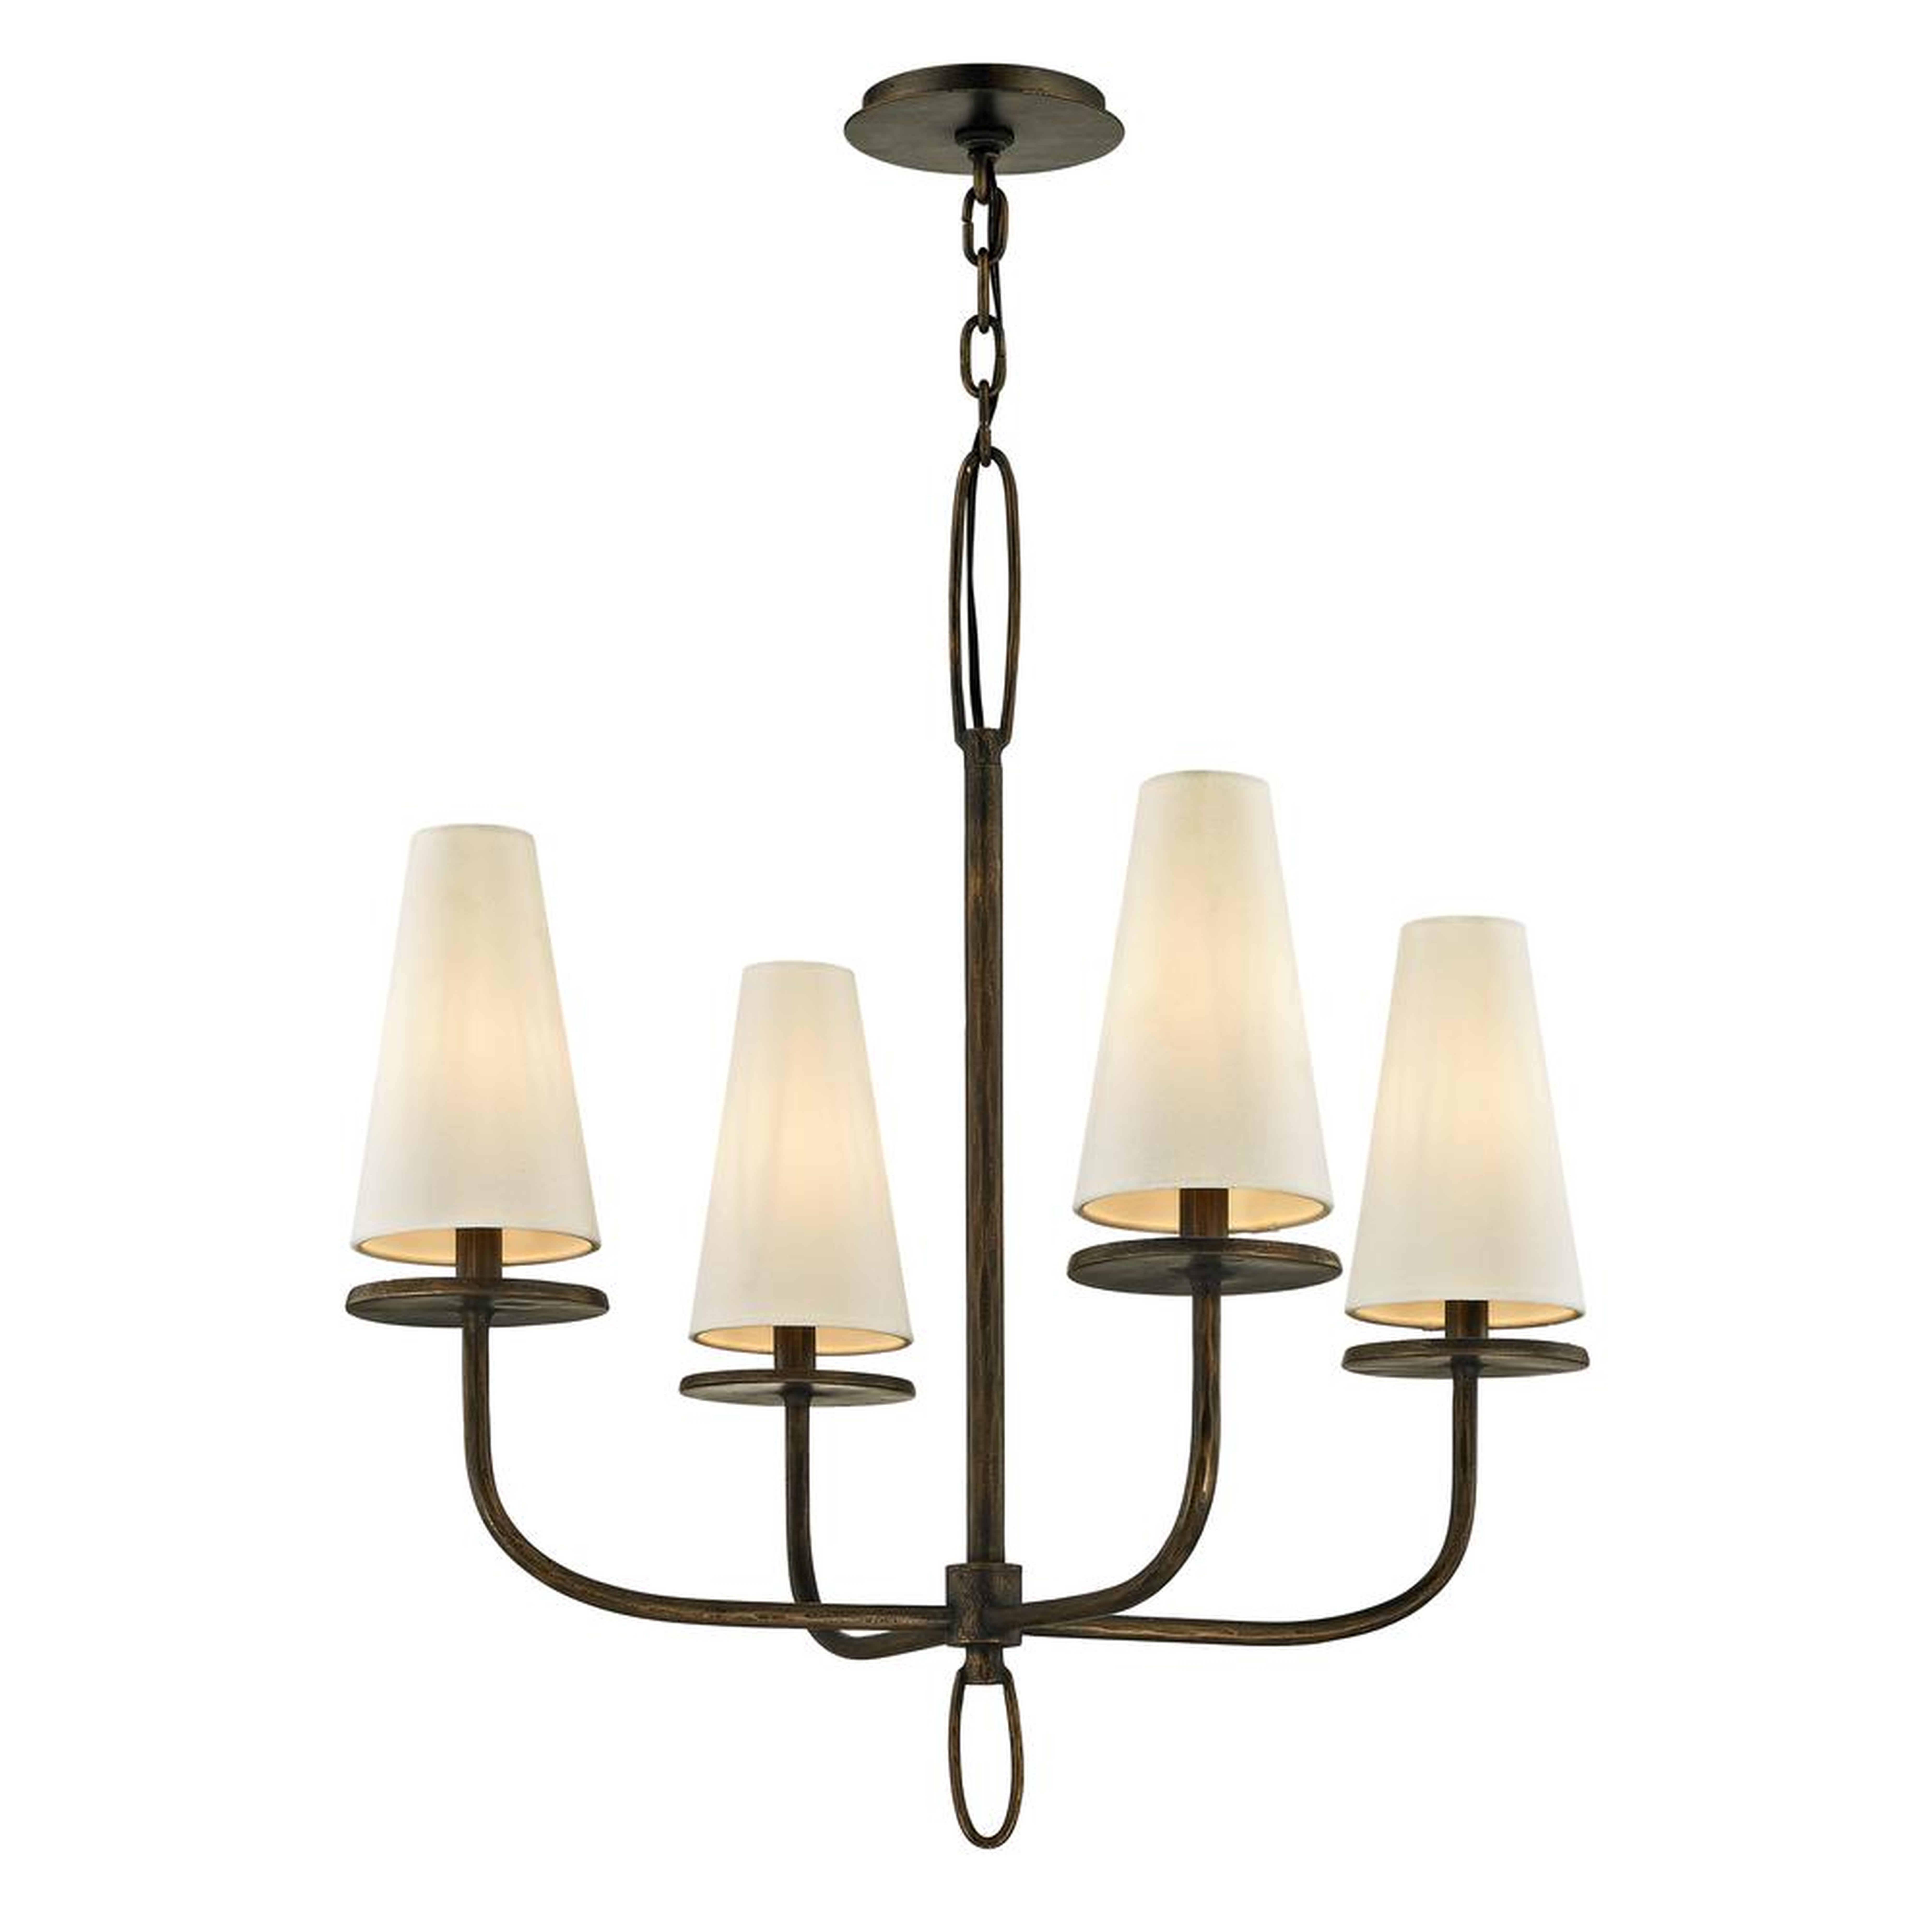 Troy Lighting Marcel 4-Light Pompeii Bronze 26 in. D Chandelier with Off-White Hardback Cotton Shade - Lamps Plus